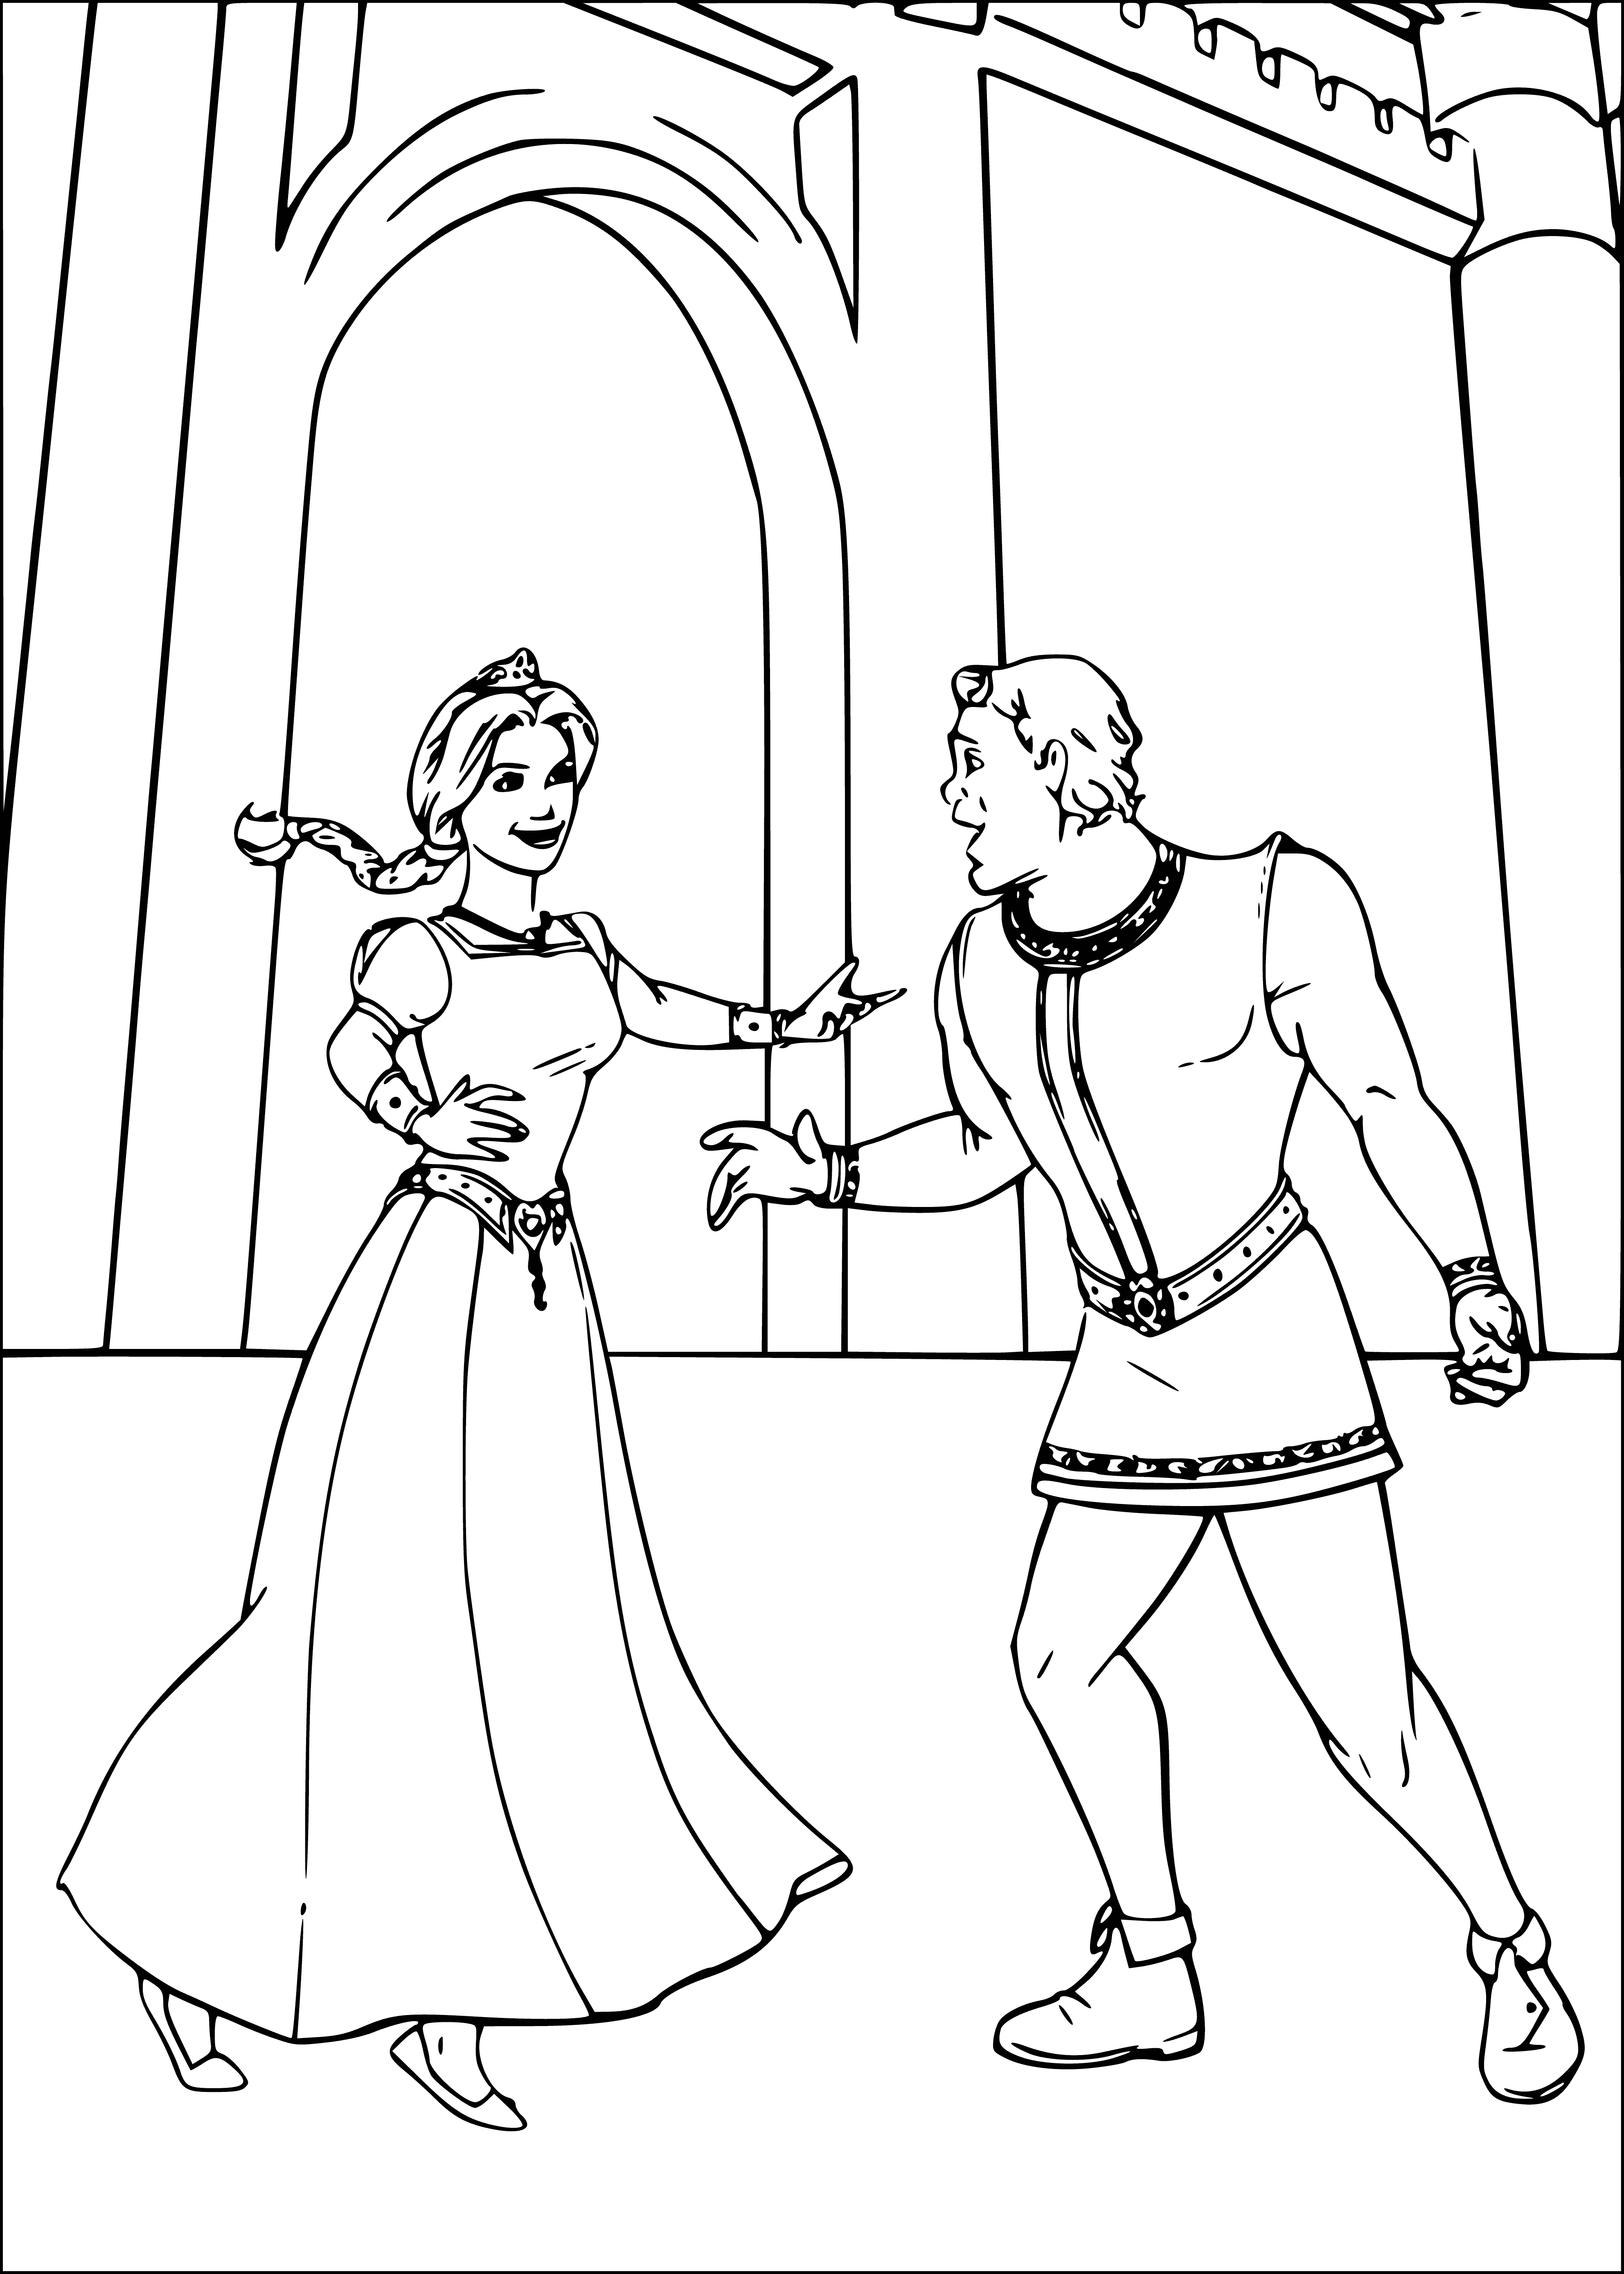 coloring page: A large ogre and a beautiful woman hold hands before a castle, looking at each other with love and contentment.